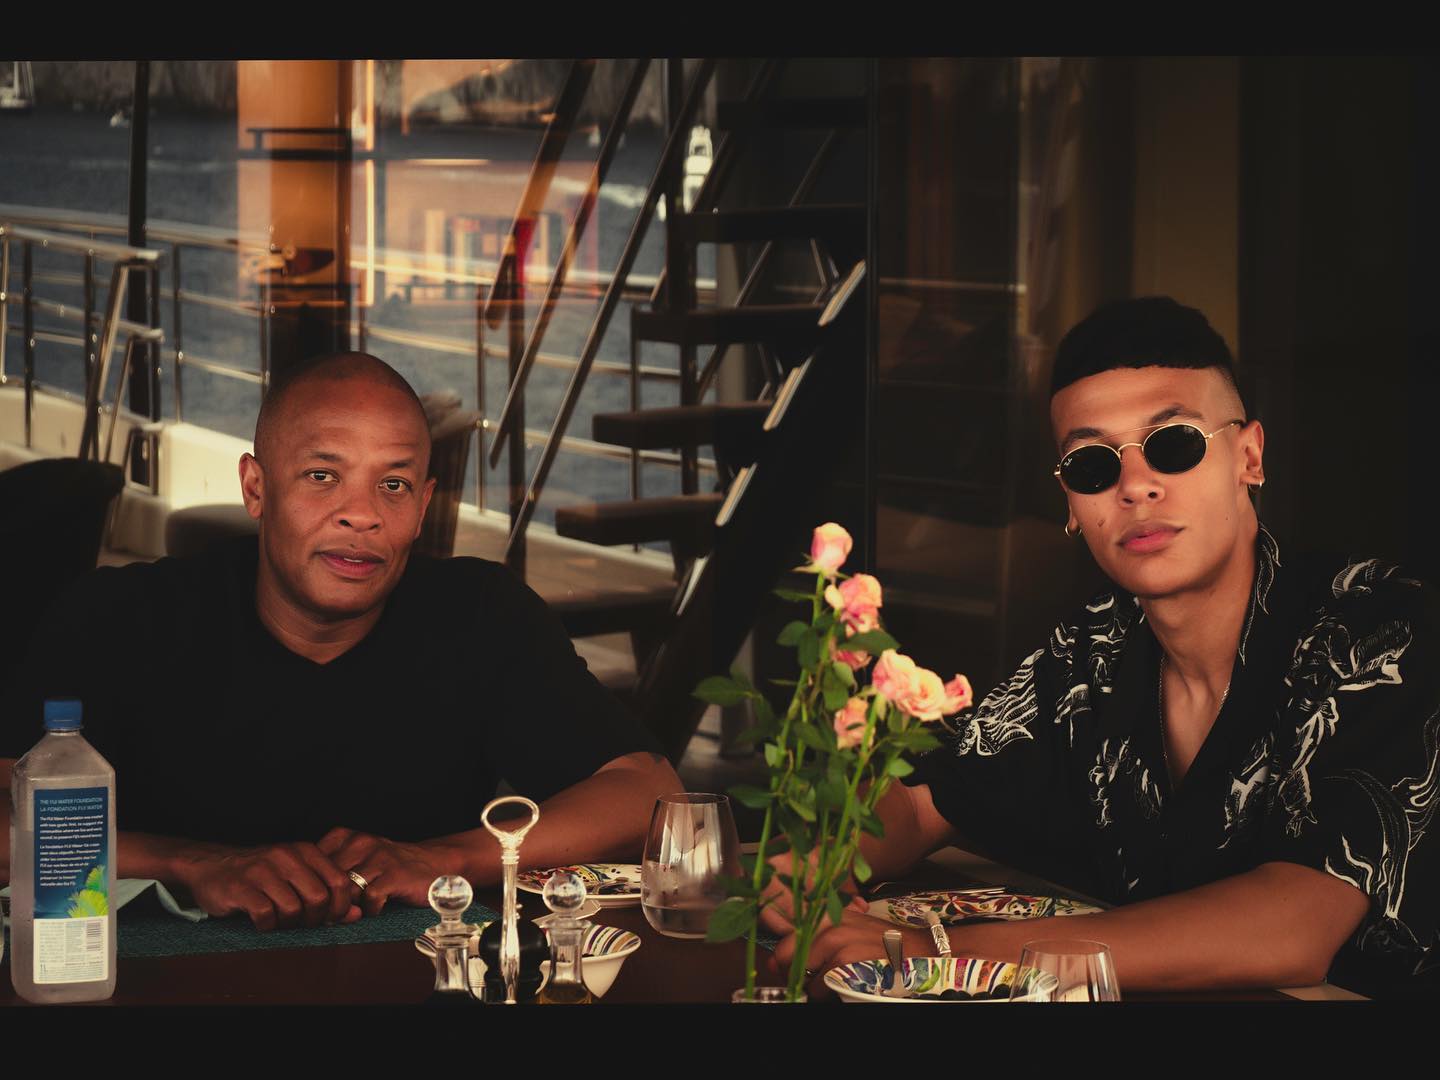 Truice Young with his father, Dr. Dre enjoying a meal together.